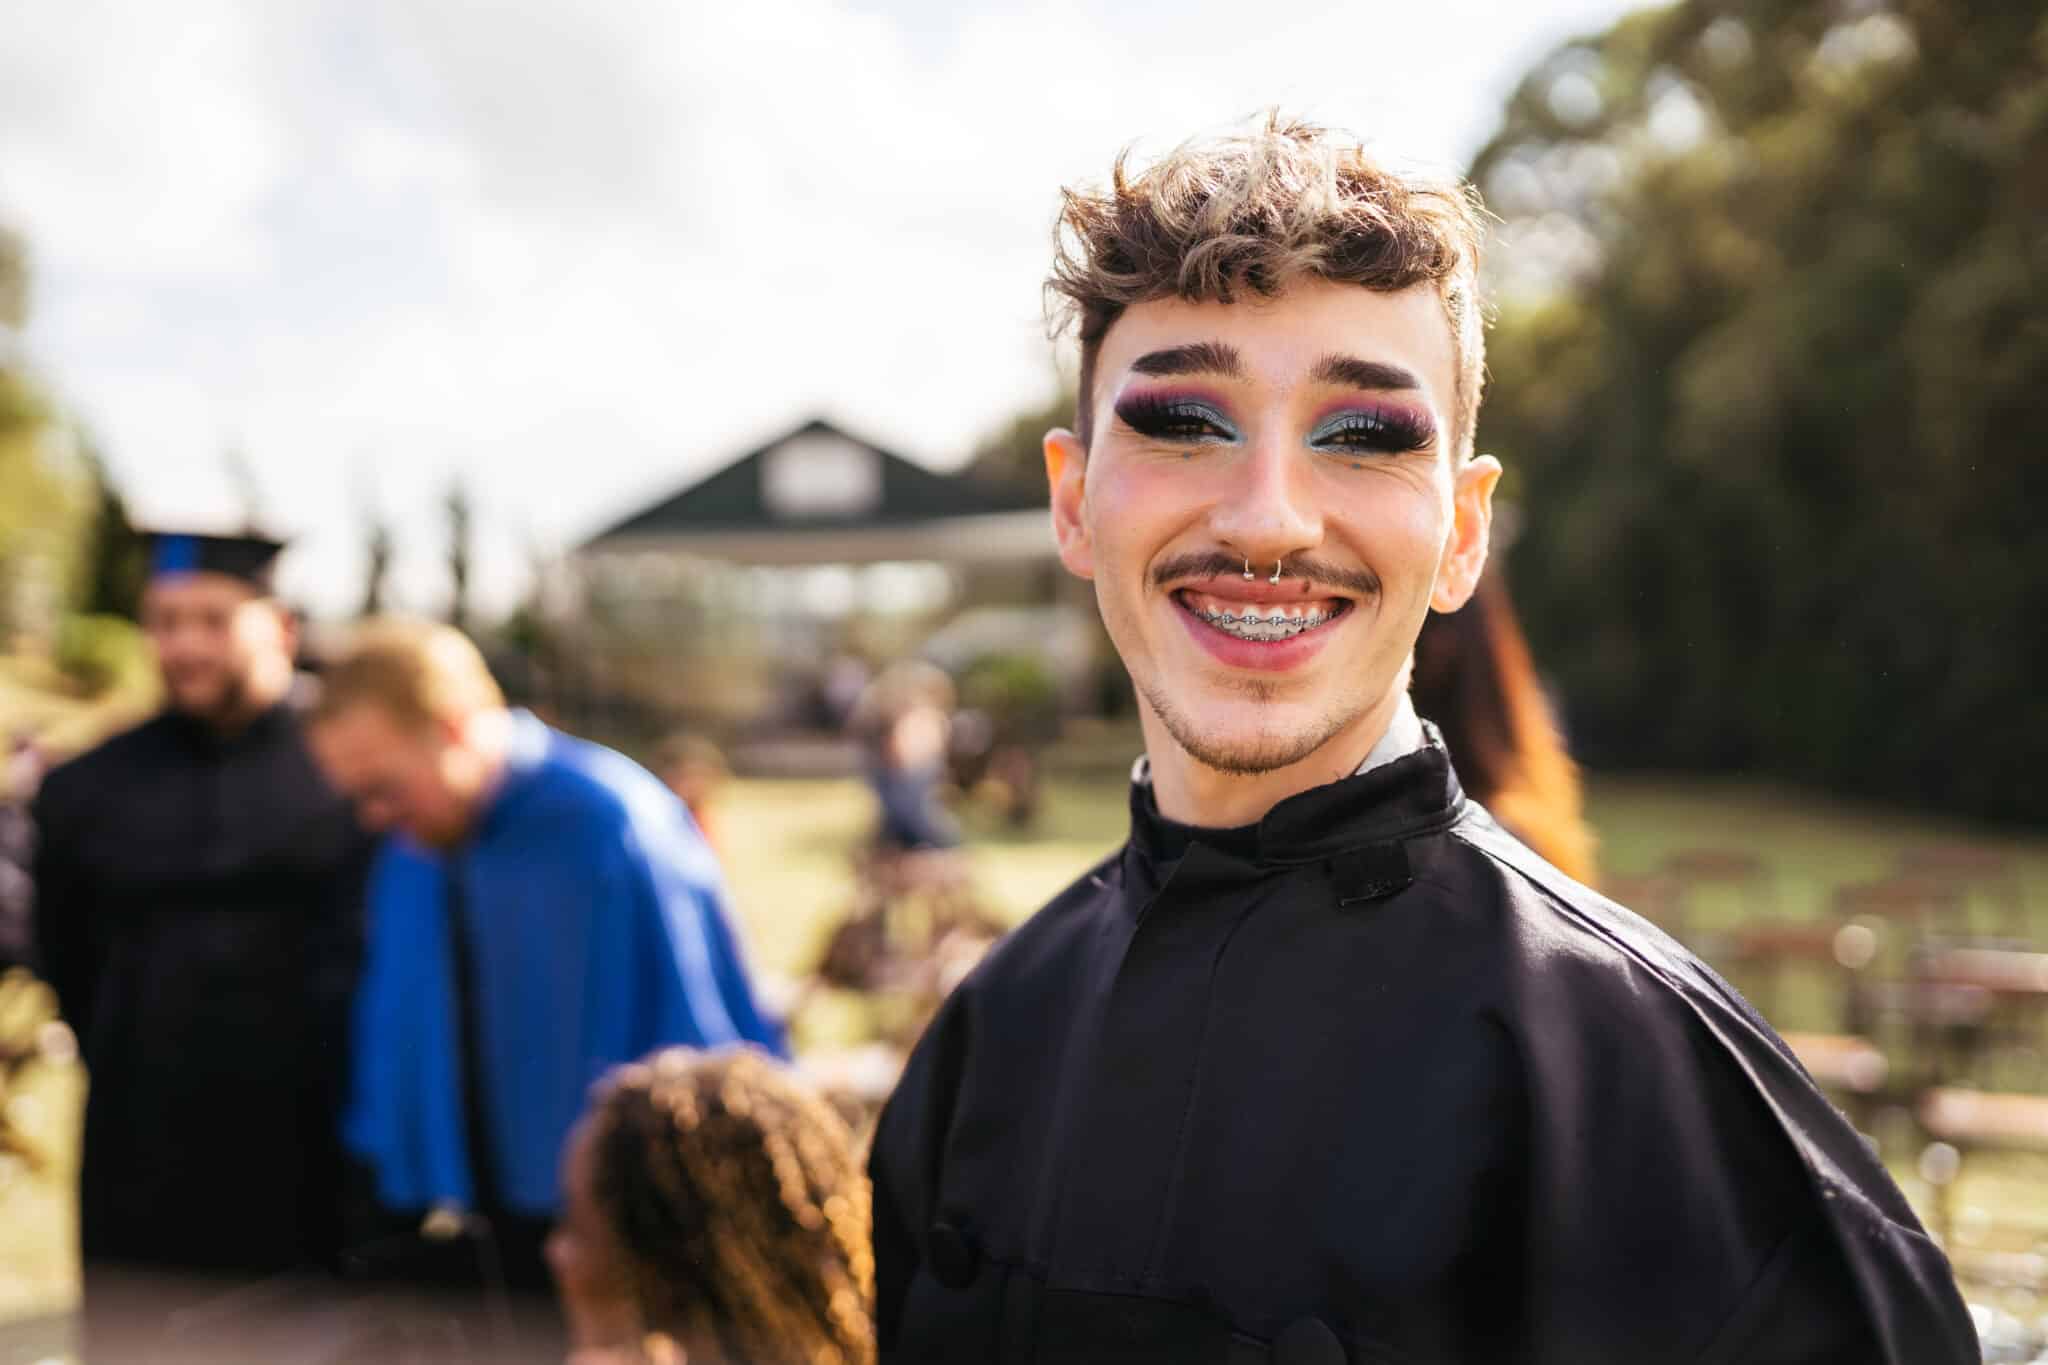 A nonbinary student during a graduation event.